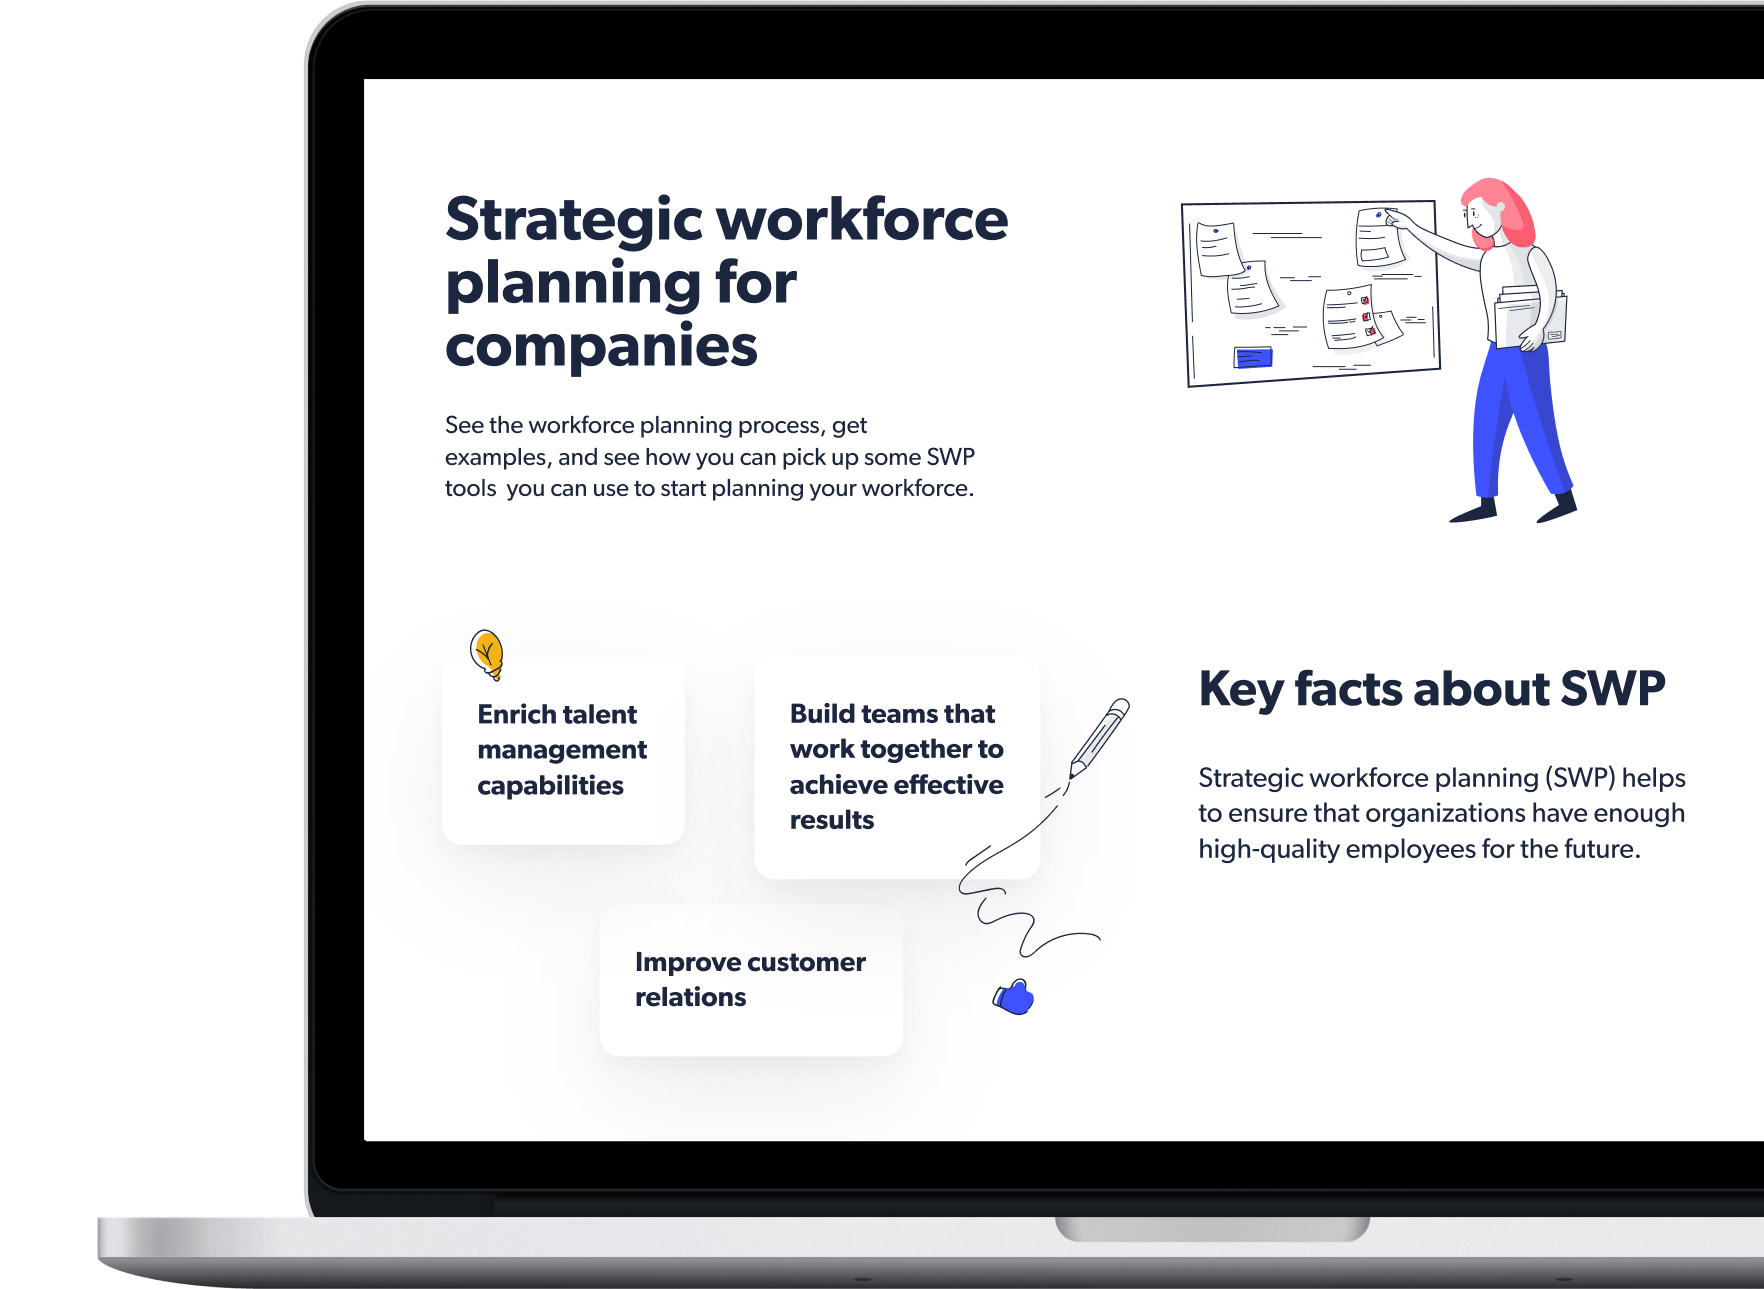 Key facts about strategic workforce planning